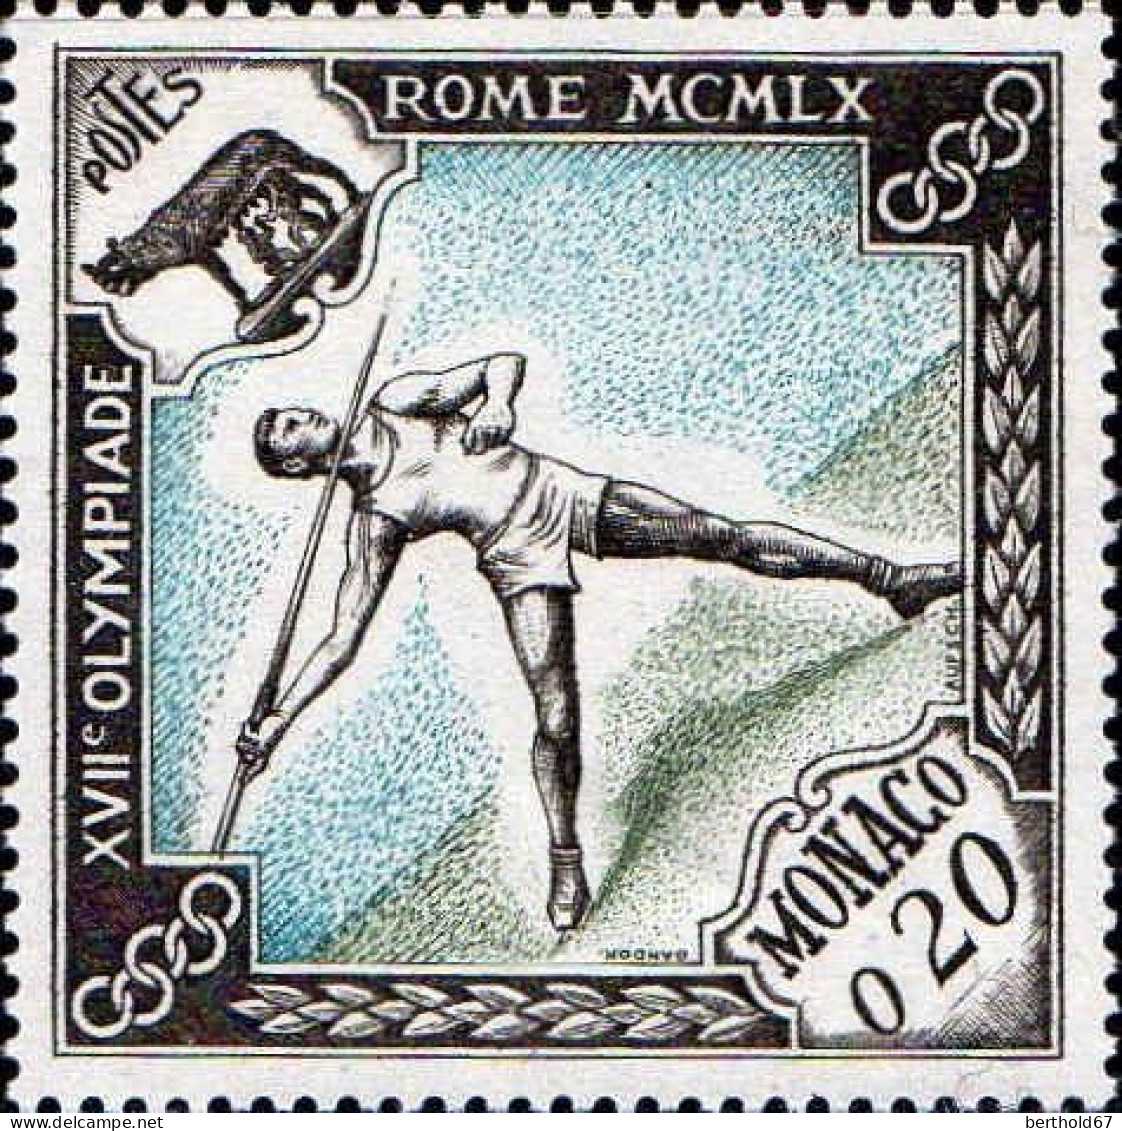 Monaco Poste N** Yv: 532/537 Jeux Olympiques Rome & Squaw-Valley - Ungebraucht